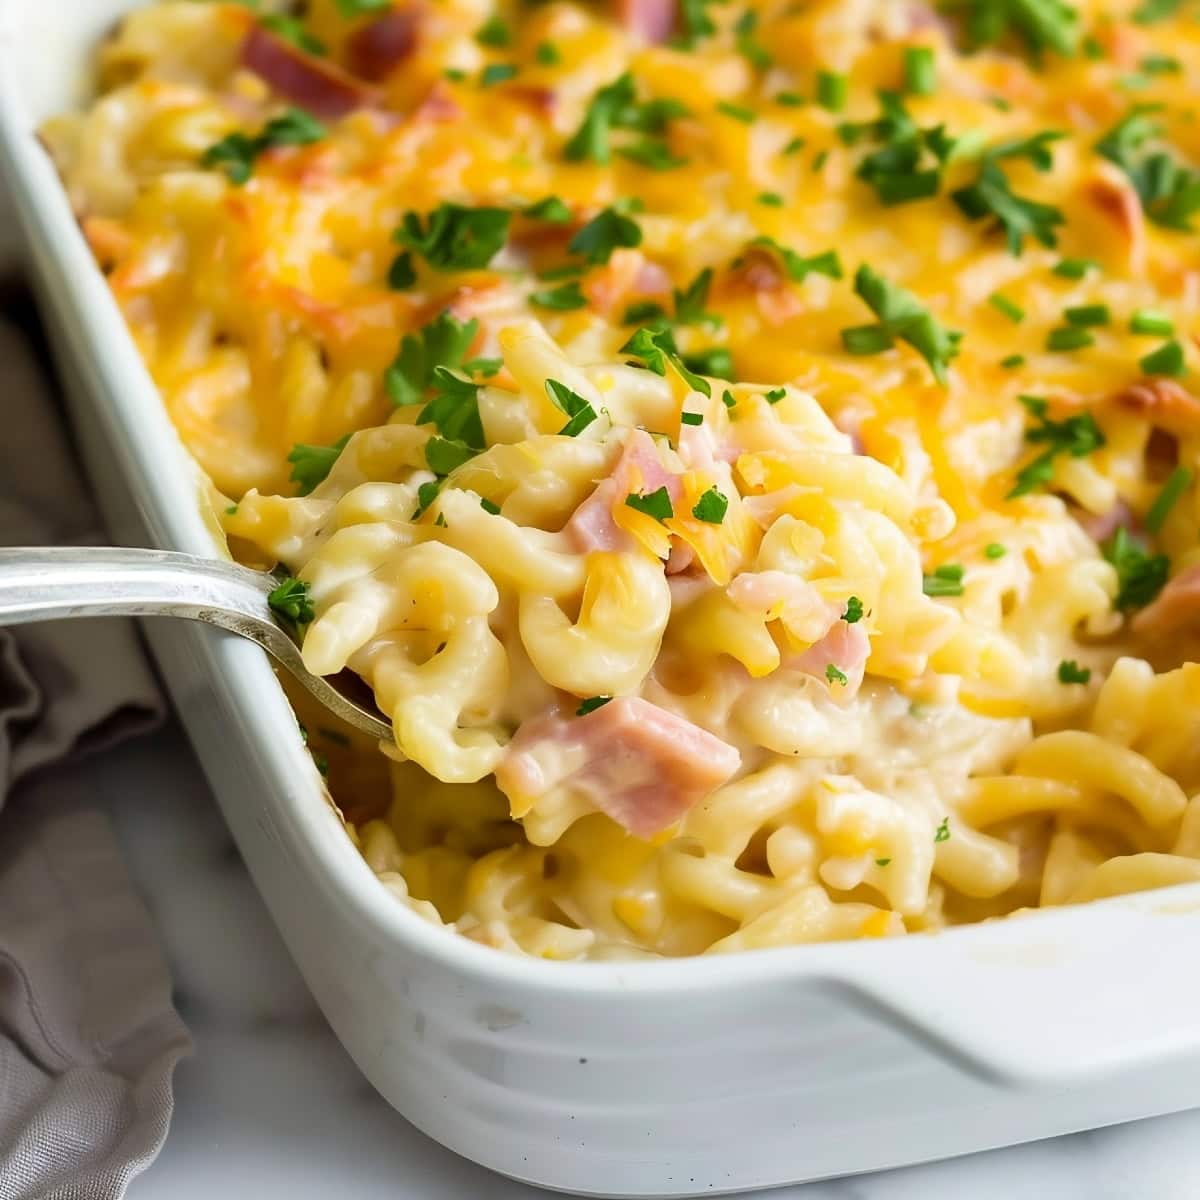 Homemade noodle casserole featuring diced hams and melted cheese.